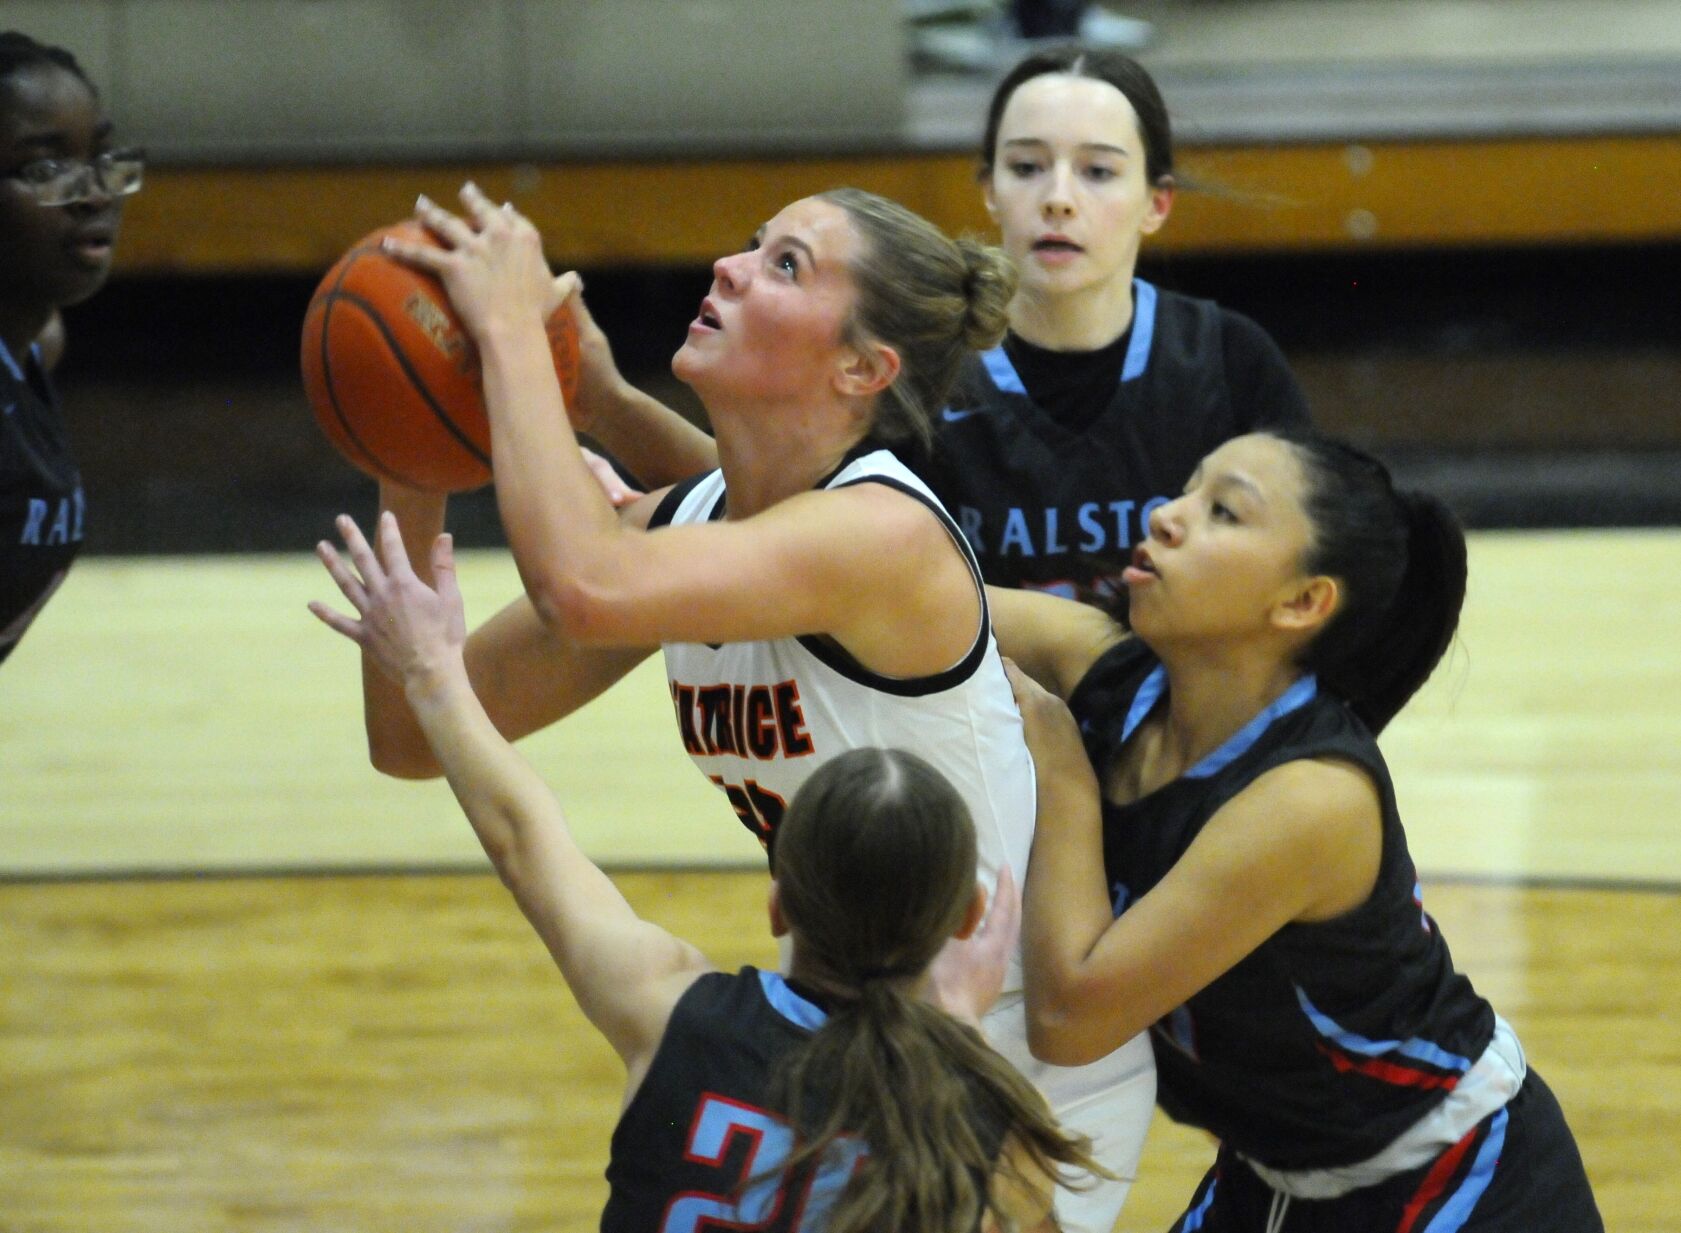 Beatrice Girls Basketball Team Dominates Ralston with 85-15 Victory